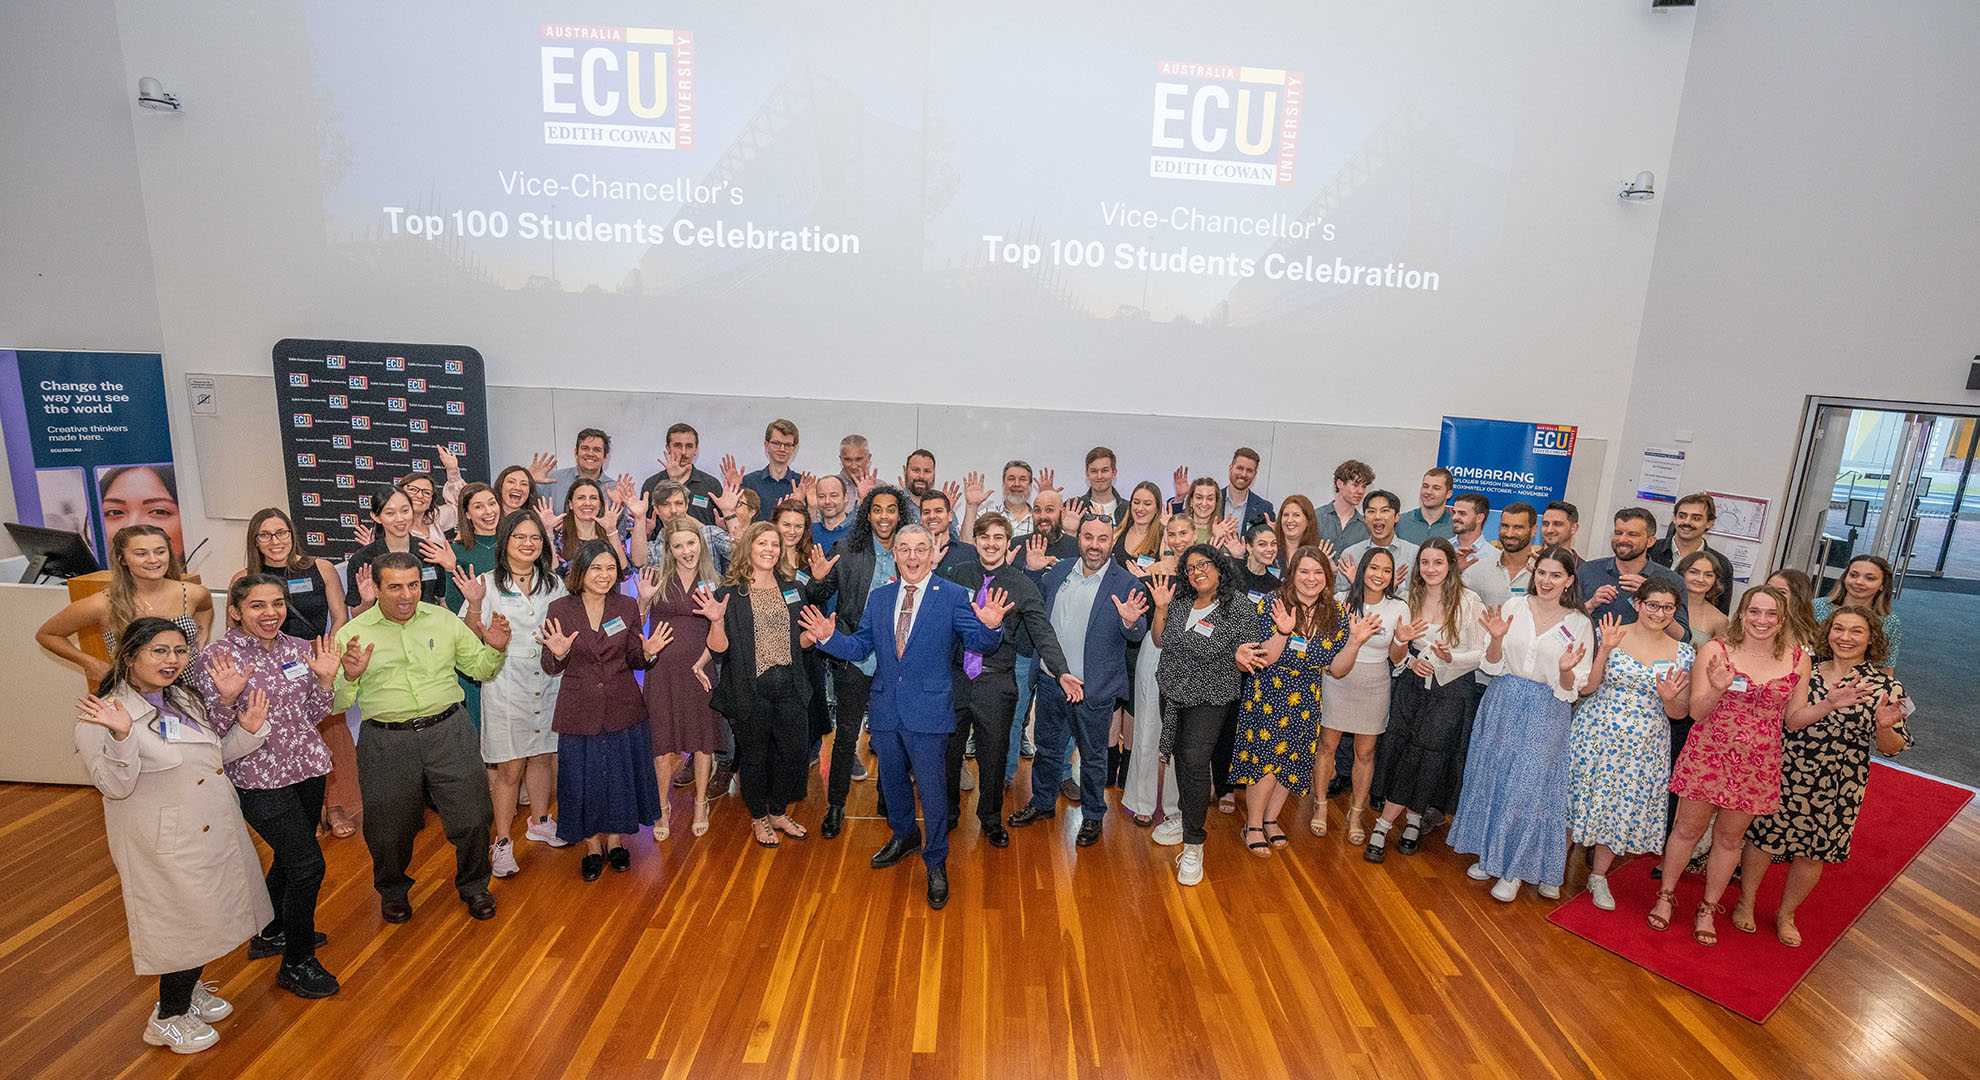 ECU Vice-Chancellor Professor Steve Chapman with the Top 100 Students put up jazz hands in celebration.